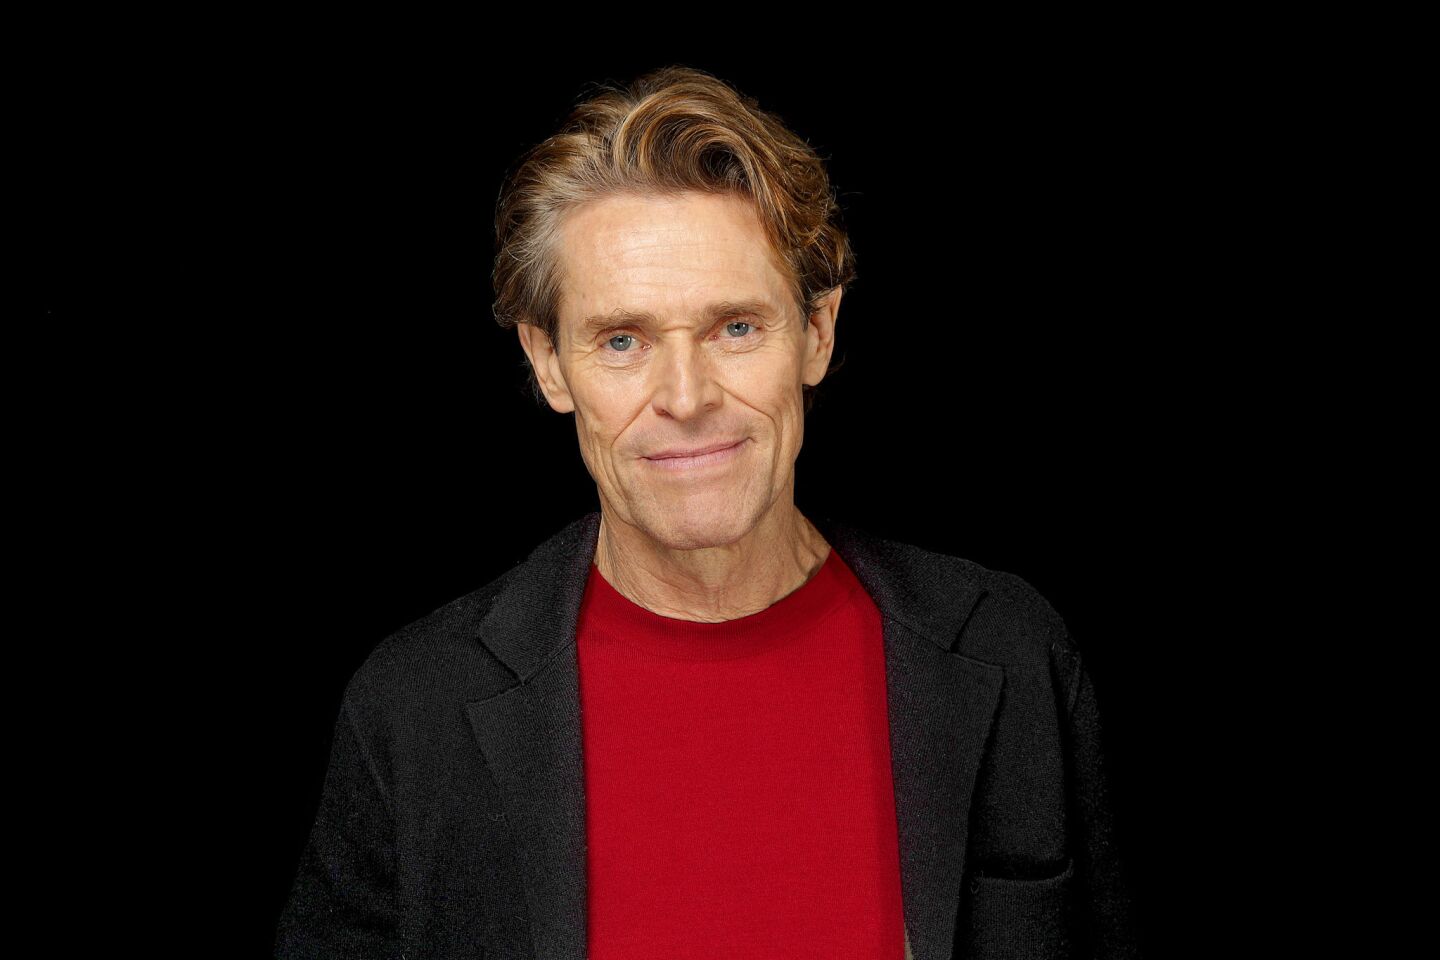 This is Willem Dafoe's fourth Oscar nomination but his first in the leading actor category. He was last nominated for supporting actor for the 2017 film "The Florida Project."